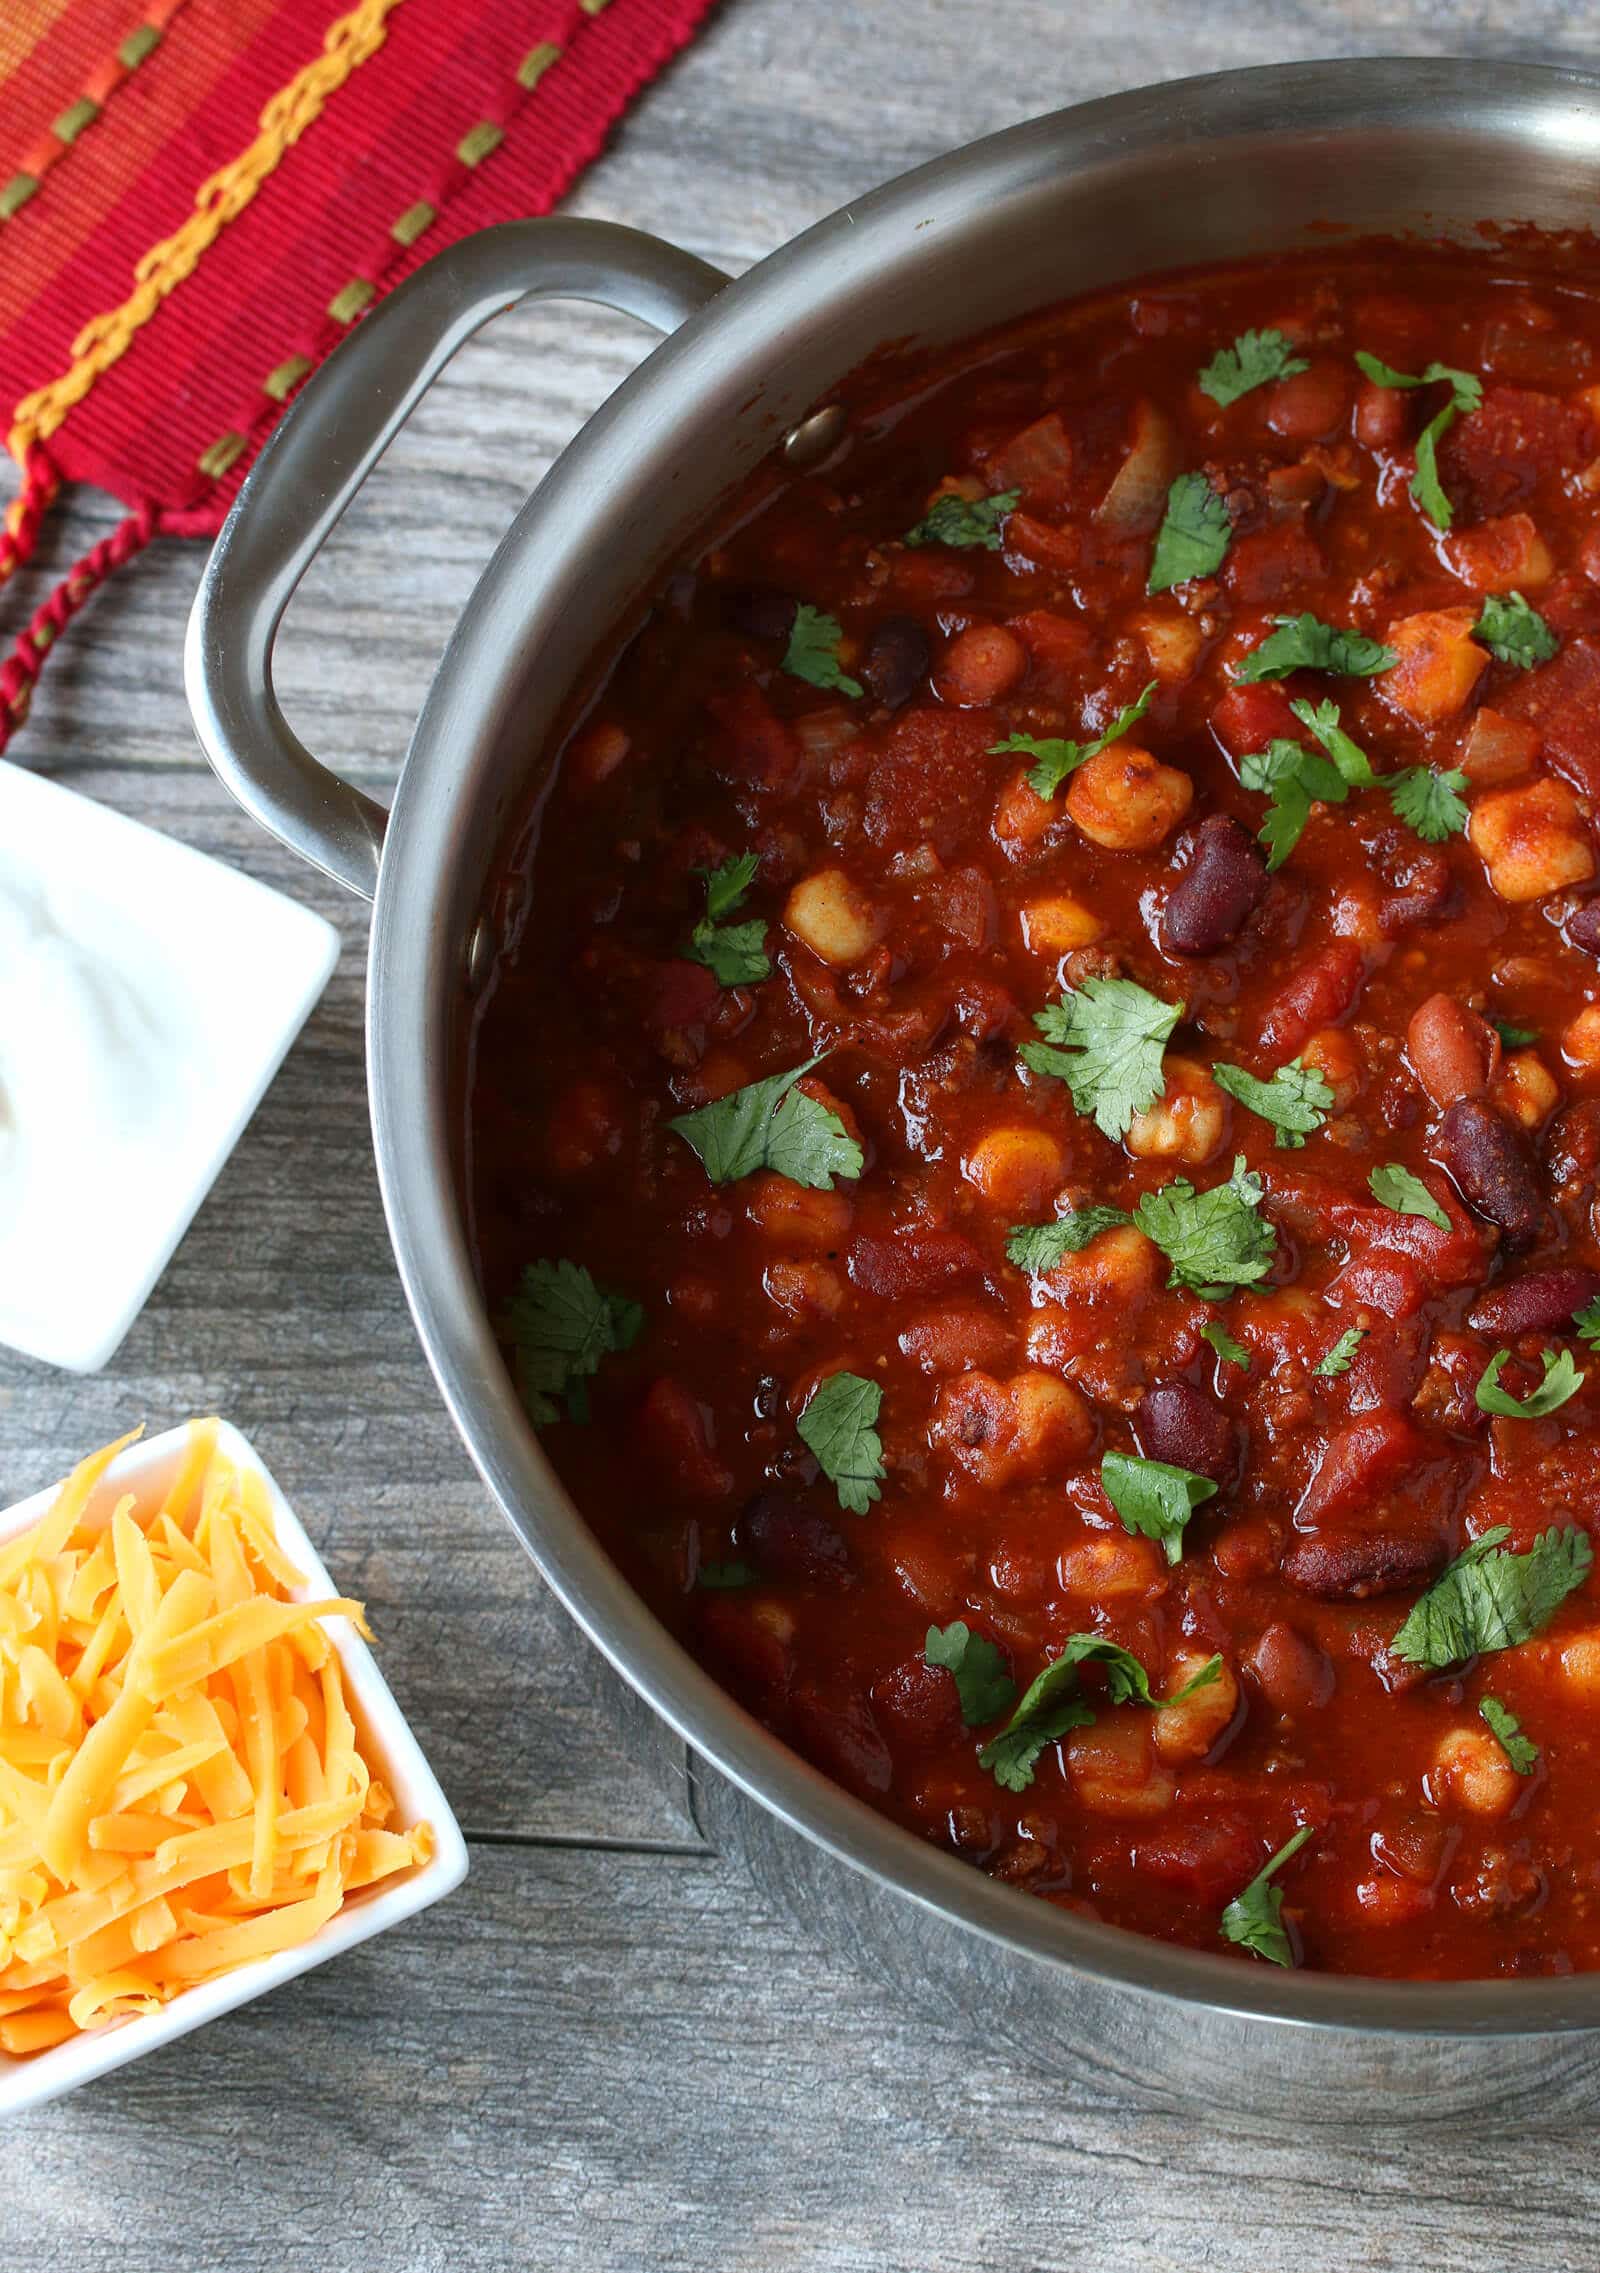 Spicy Chipotle Chili with Hominy - The Daring Gourmet